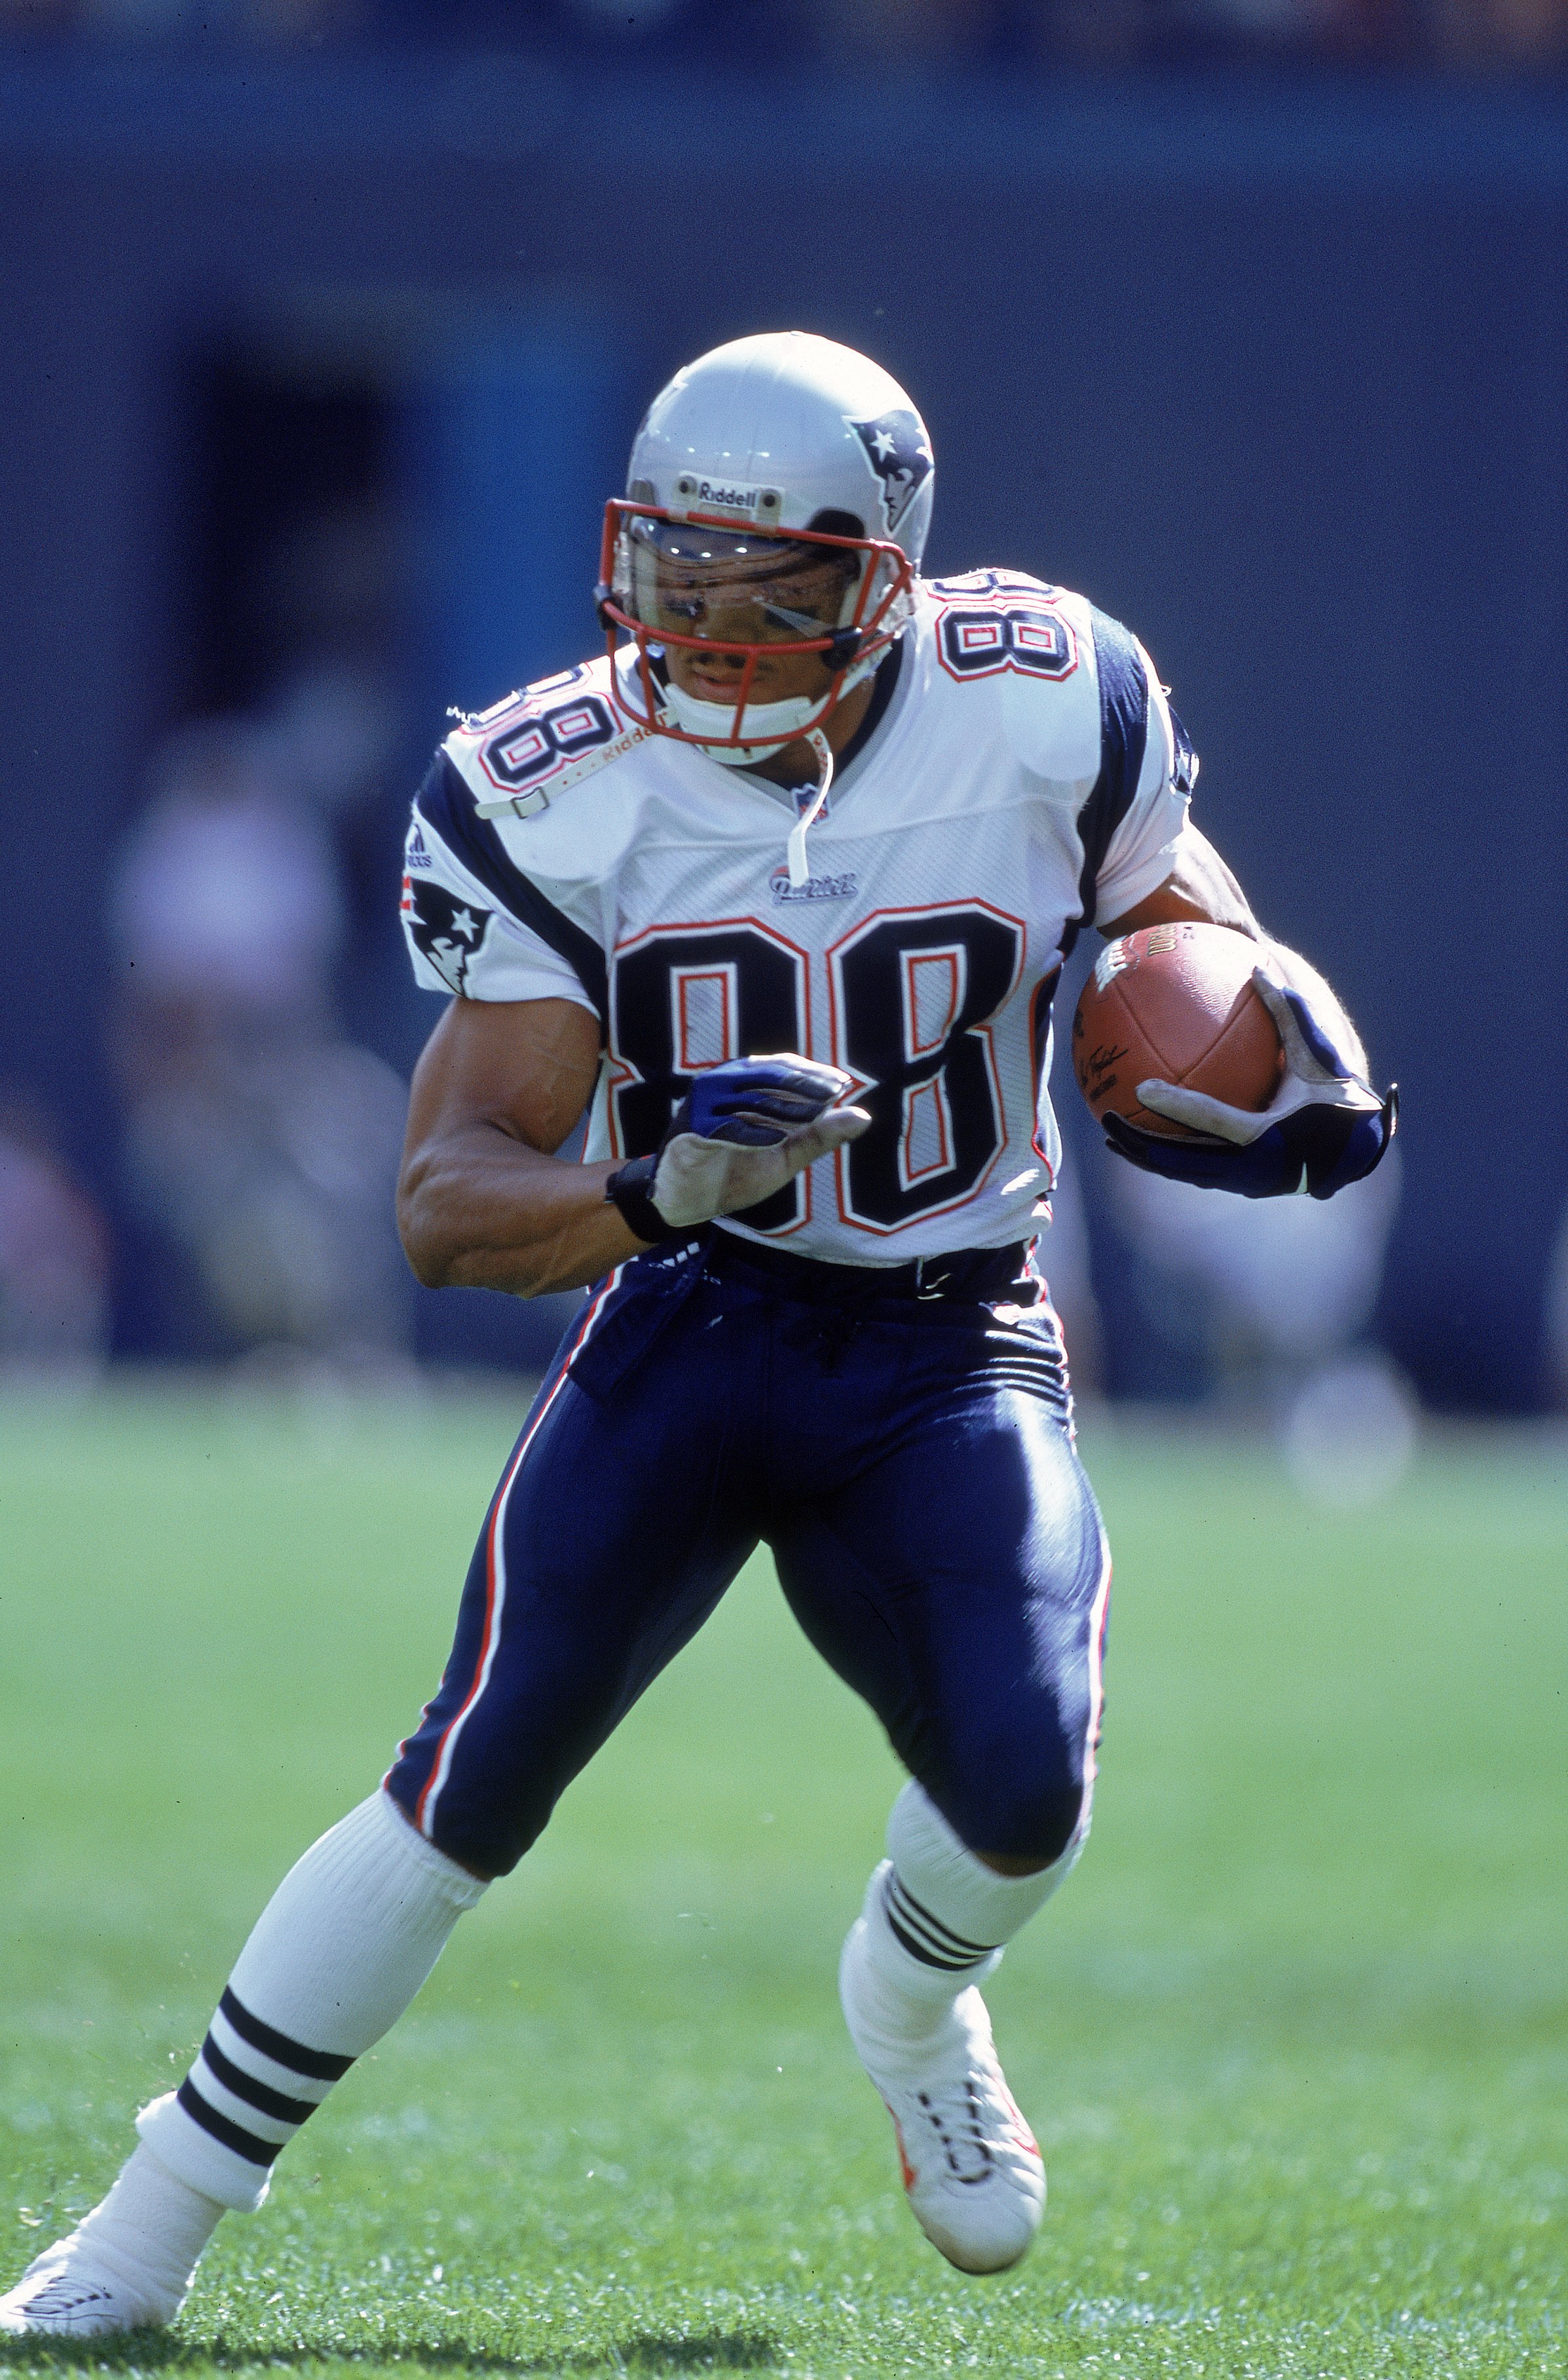 1 Oct 2000: Terry Glenn #88 of the New England Patriots scrambles with the ball during the game against the Denver Bronocs at the Mile High Stadium in Denver, Colorado. The Patriots defearted the Broncos 28-19.Mandatory Credit: Brian Bahr  /Allsport